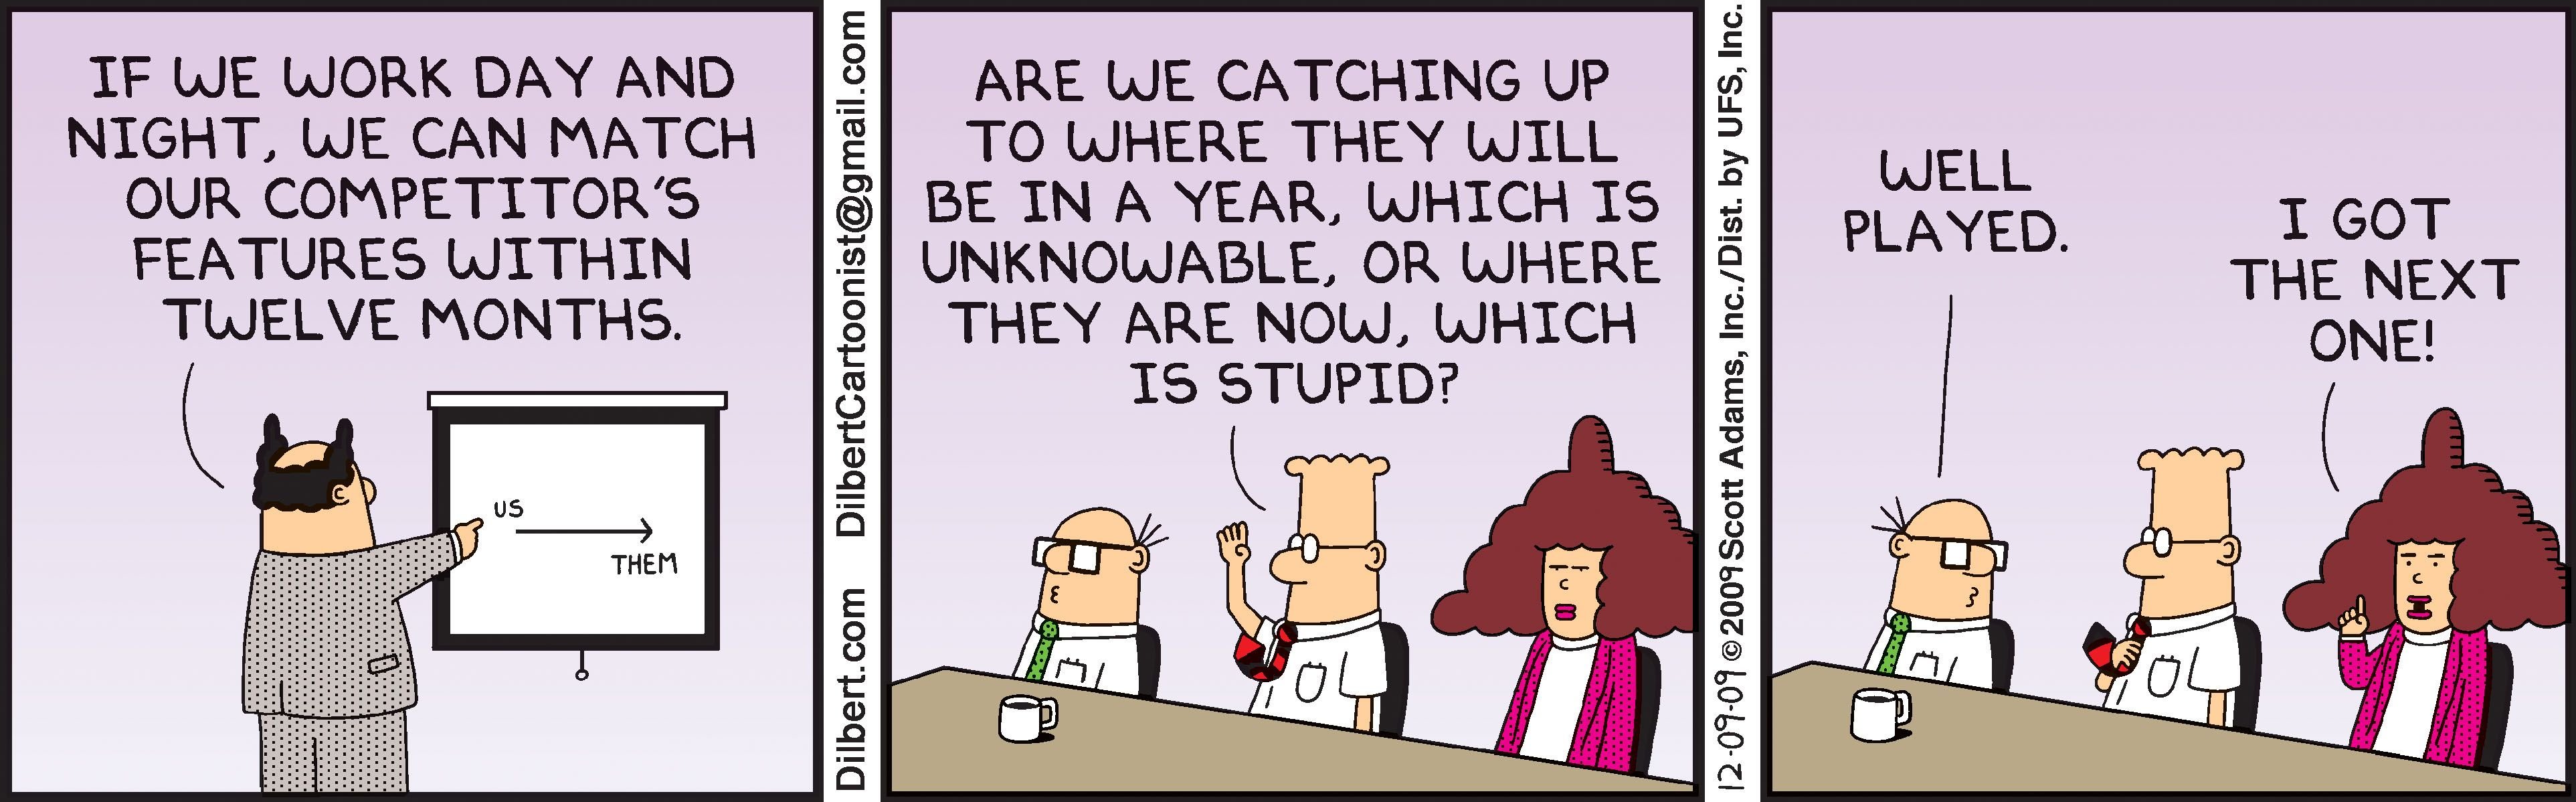 dilbert-comic-keeping-up-with-competition.jpg